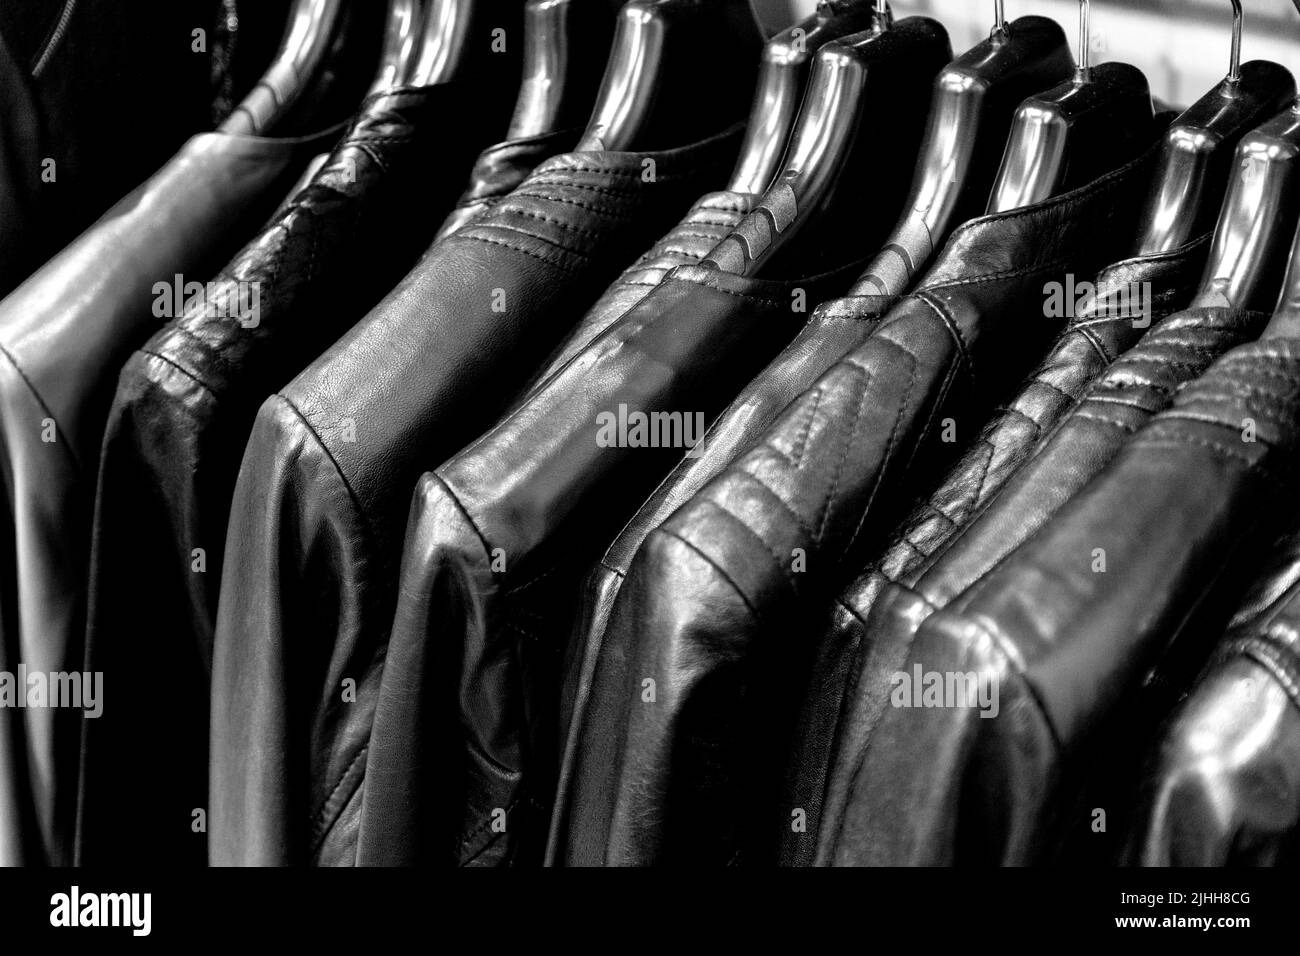 Colourful leather jackets in red and black hanging on a rail Stock Photo